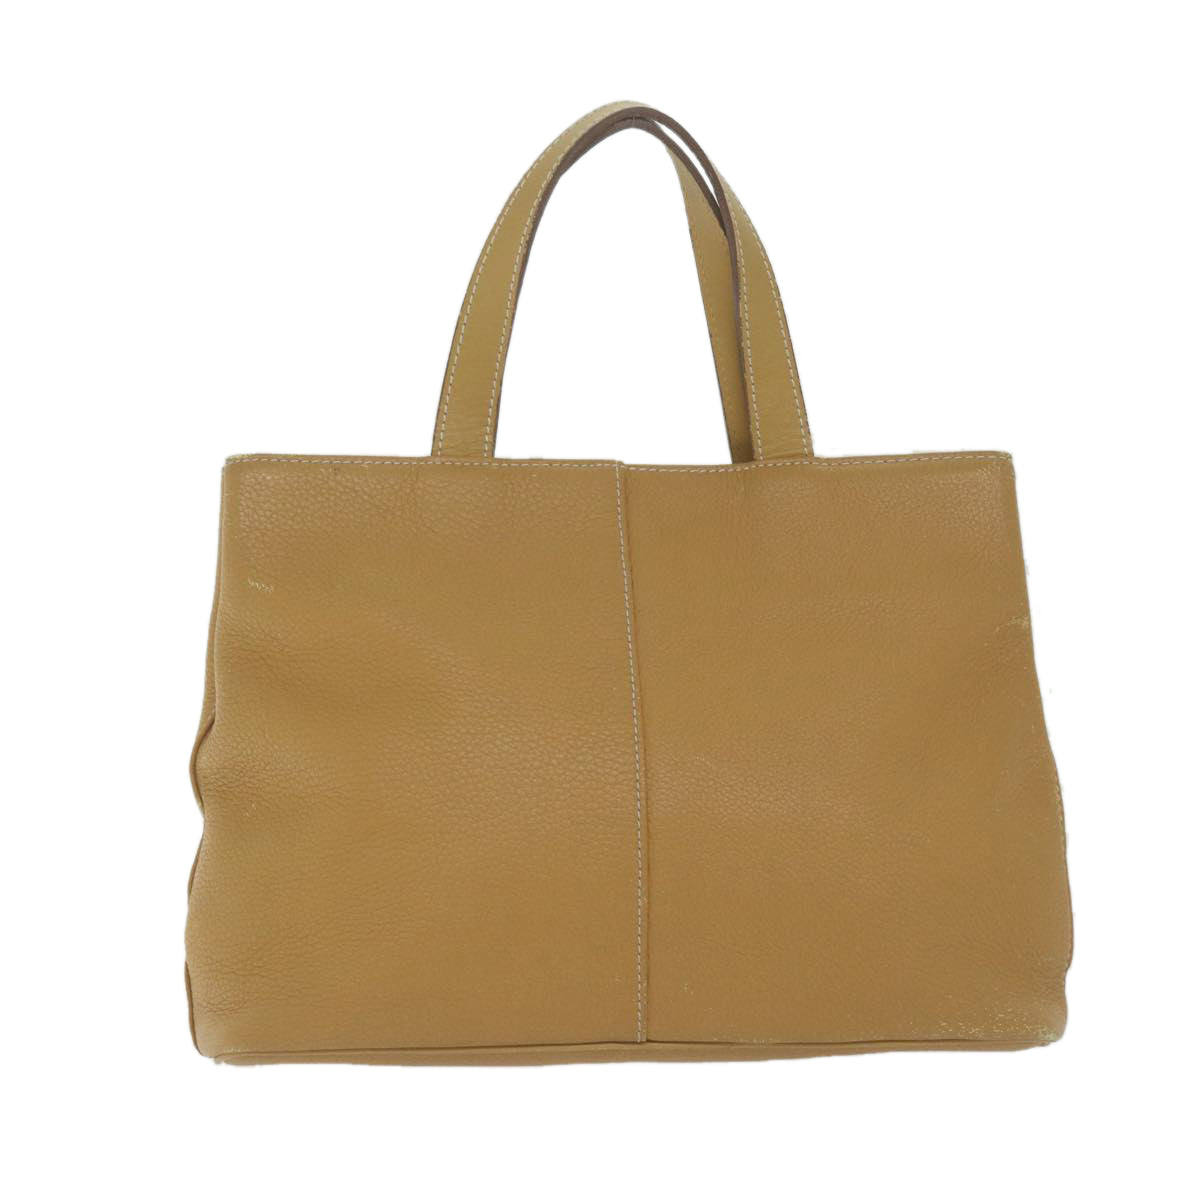 Burberrys Tote Bag Leather Beige Auth fm3177 - 0